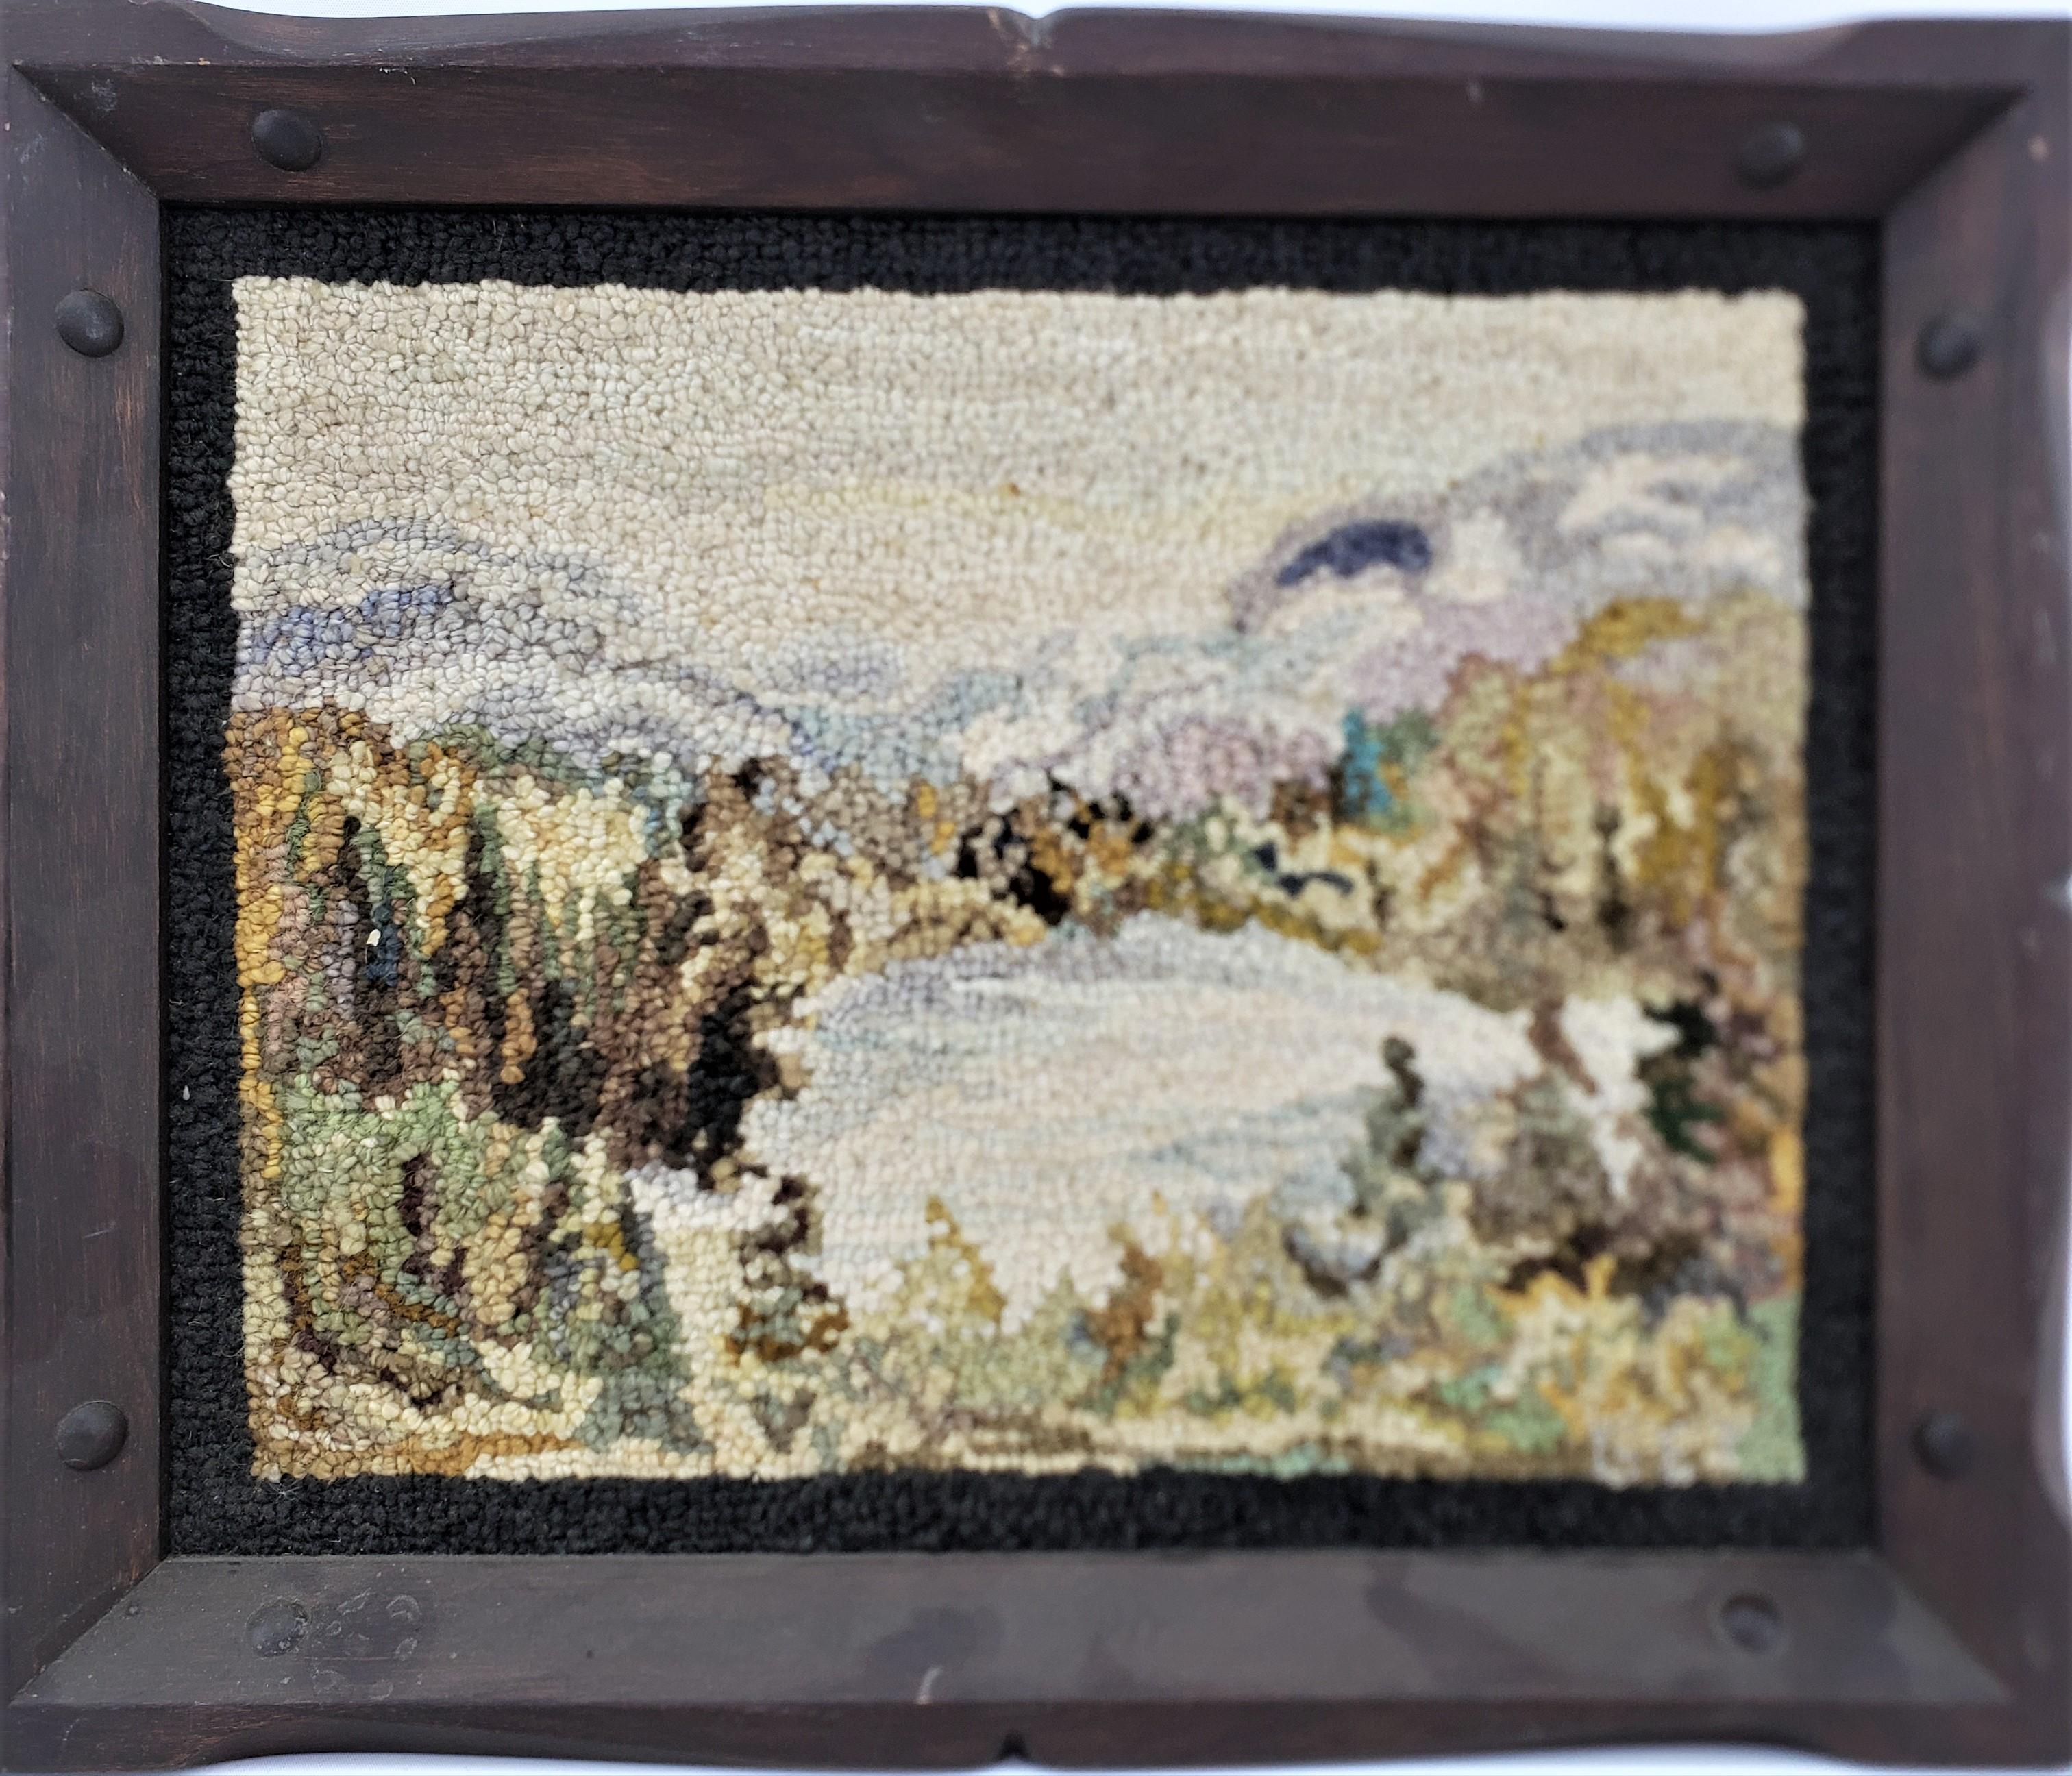 This framed hooked rug or mat was done by the well known George Edouard Tremblay of Quebec Canada in approximately 1940 in his period Folk Art style. The rug or mat is done with wool, presumably on burlap and framed in a rustic styled wooden frame.